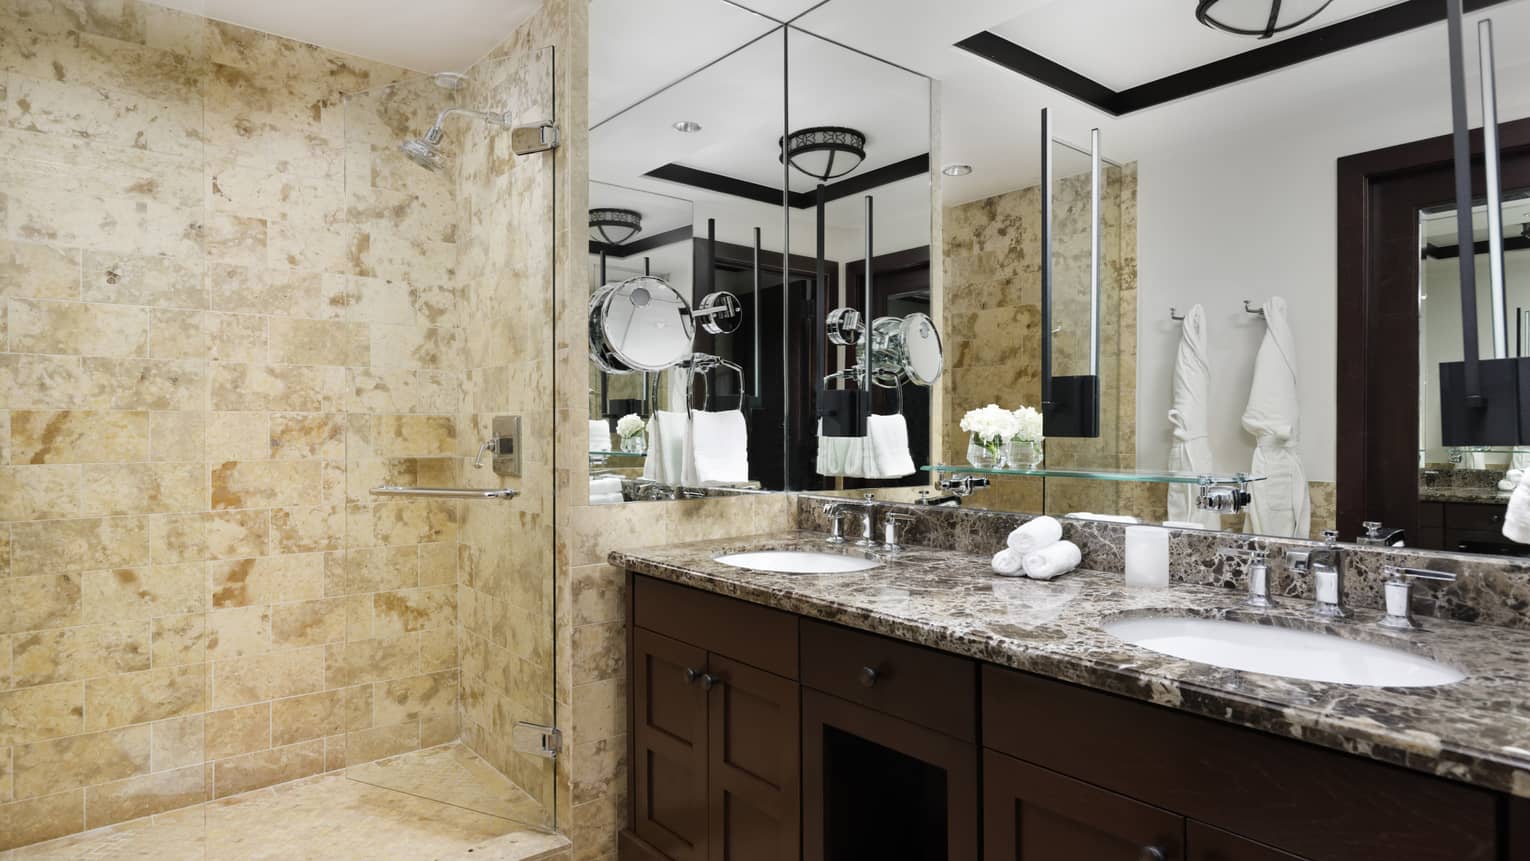 Bathroom with double vanity and tan, limestone walk-in shower